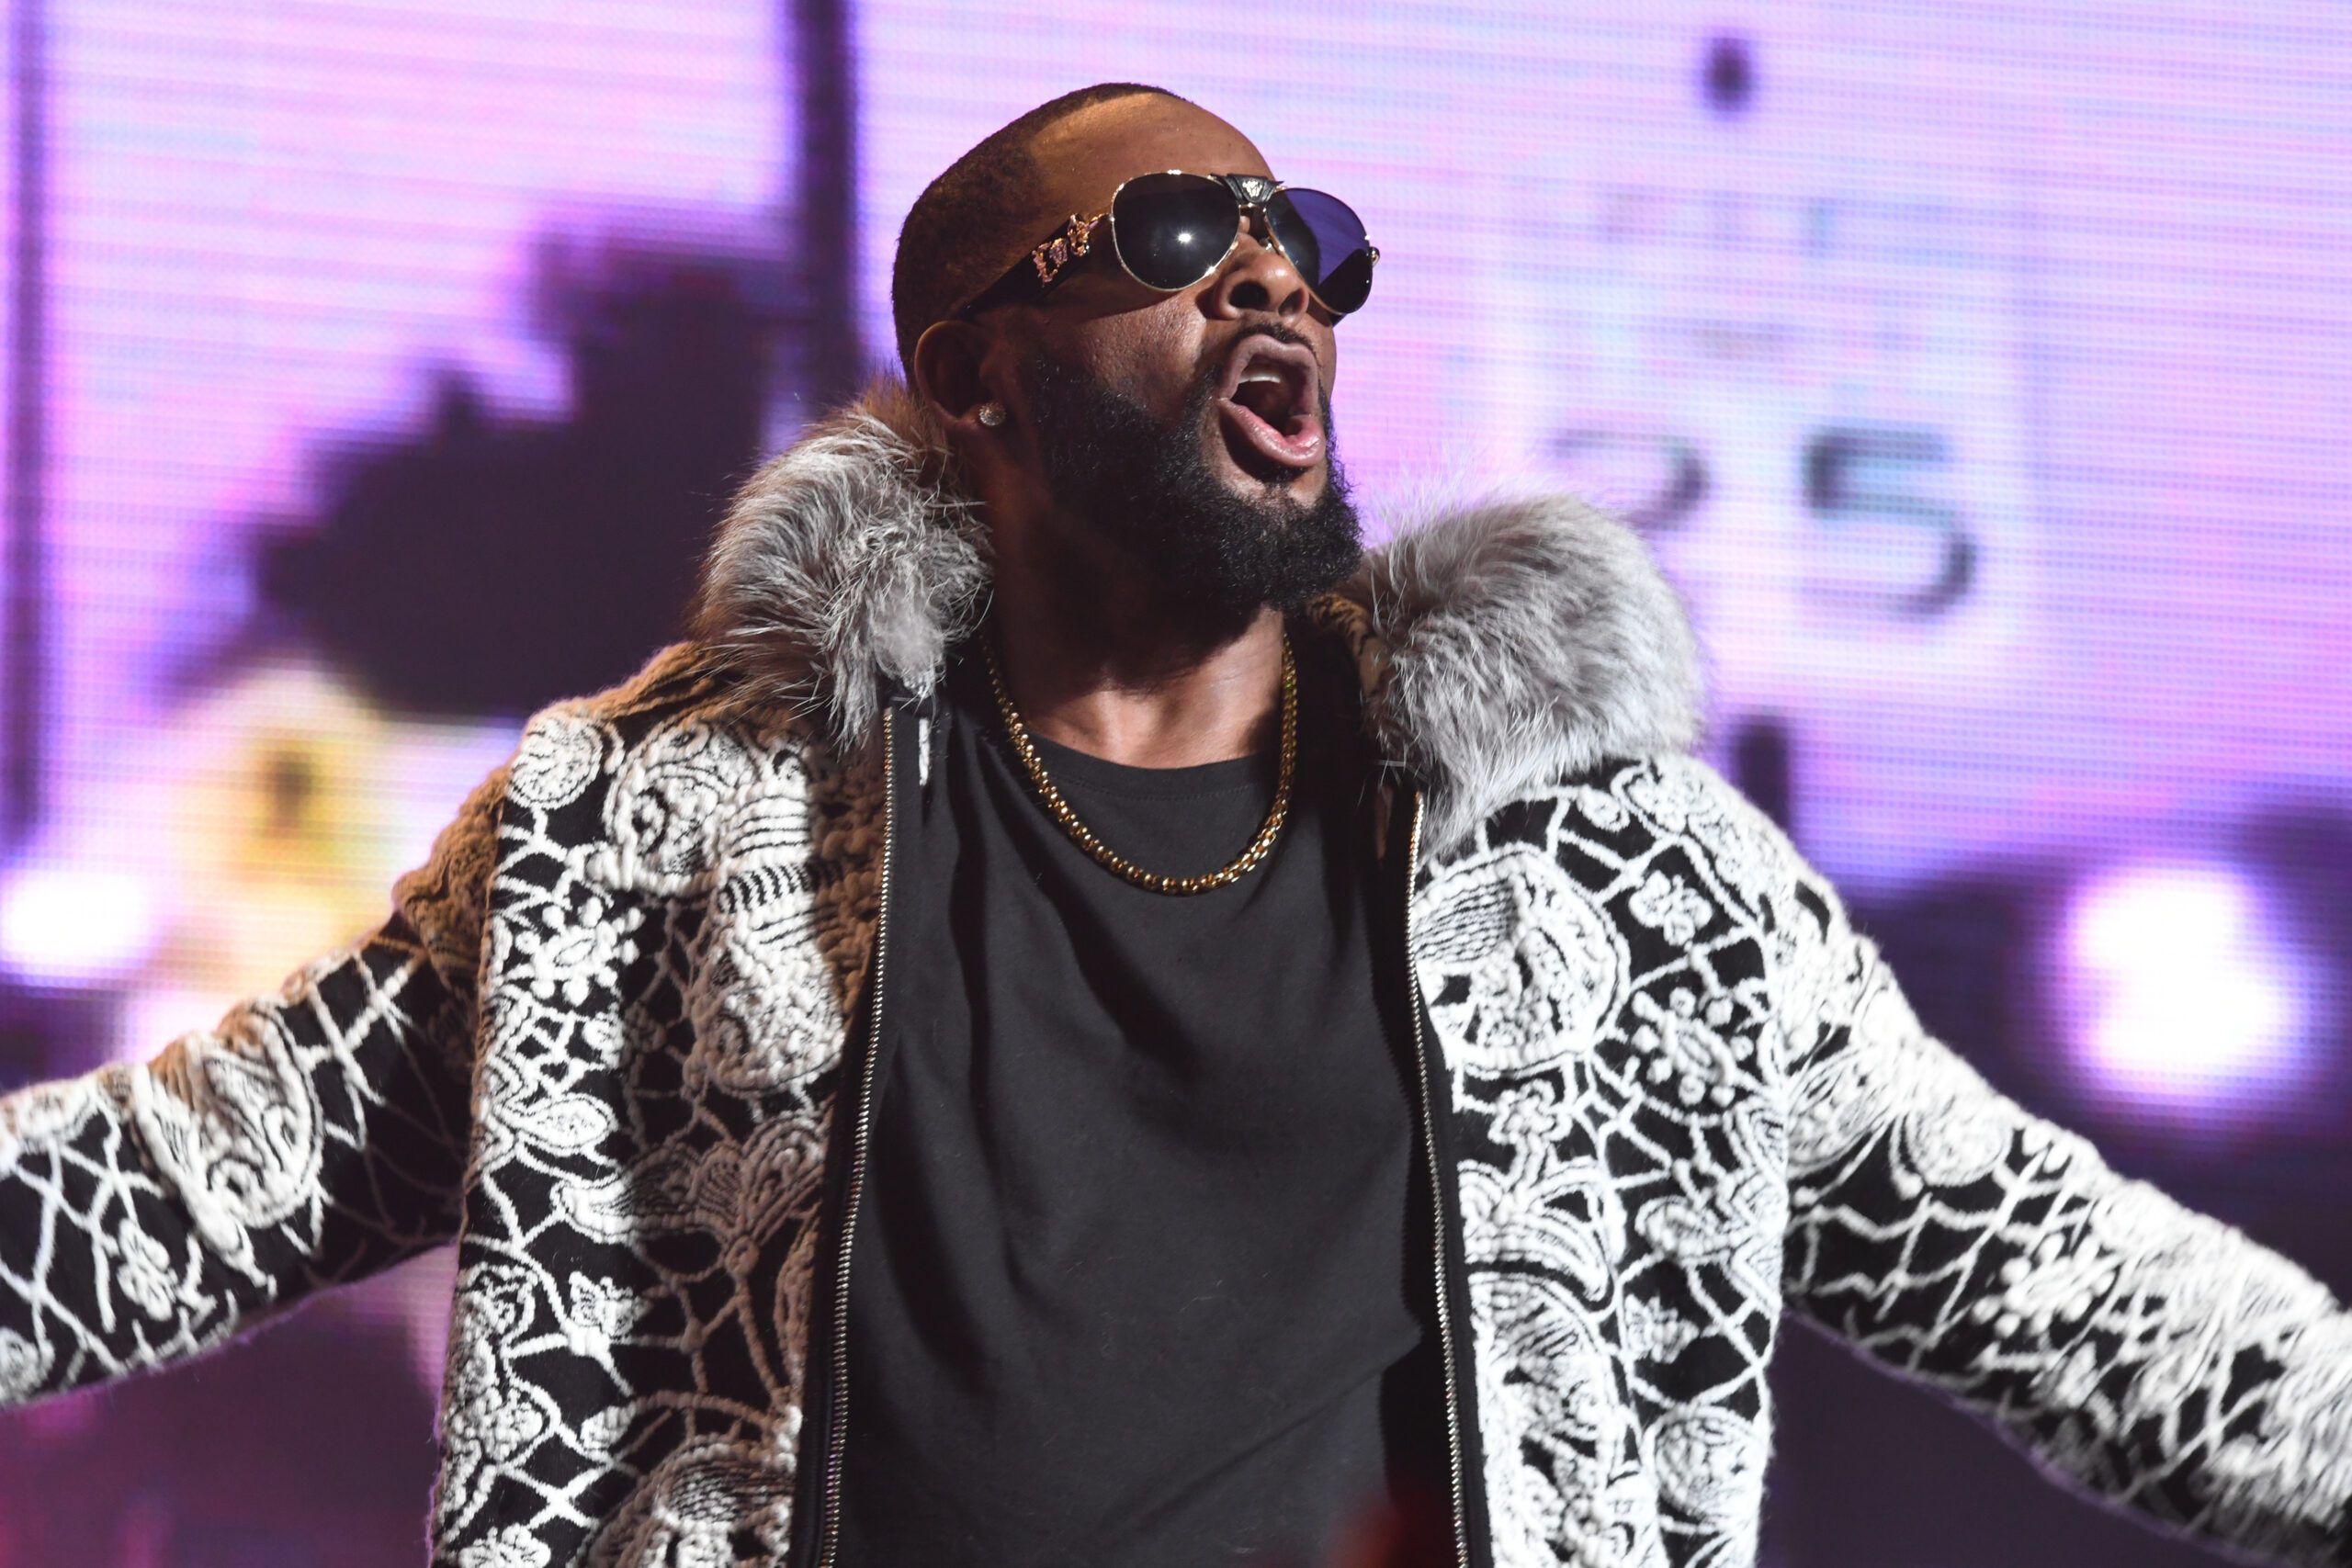 R. Kelly performs at Little Caesars Arena on February 21, 2018 in Detroit, Michigan.